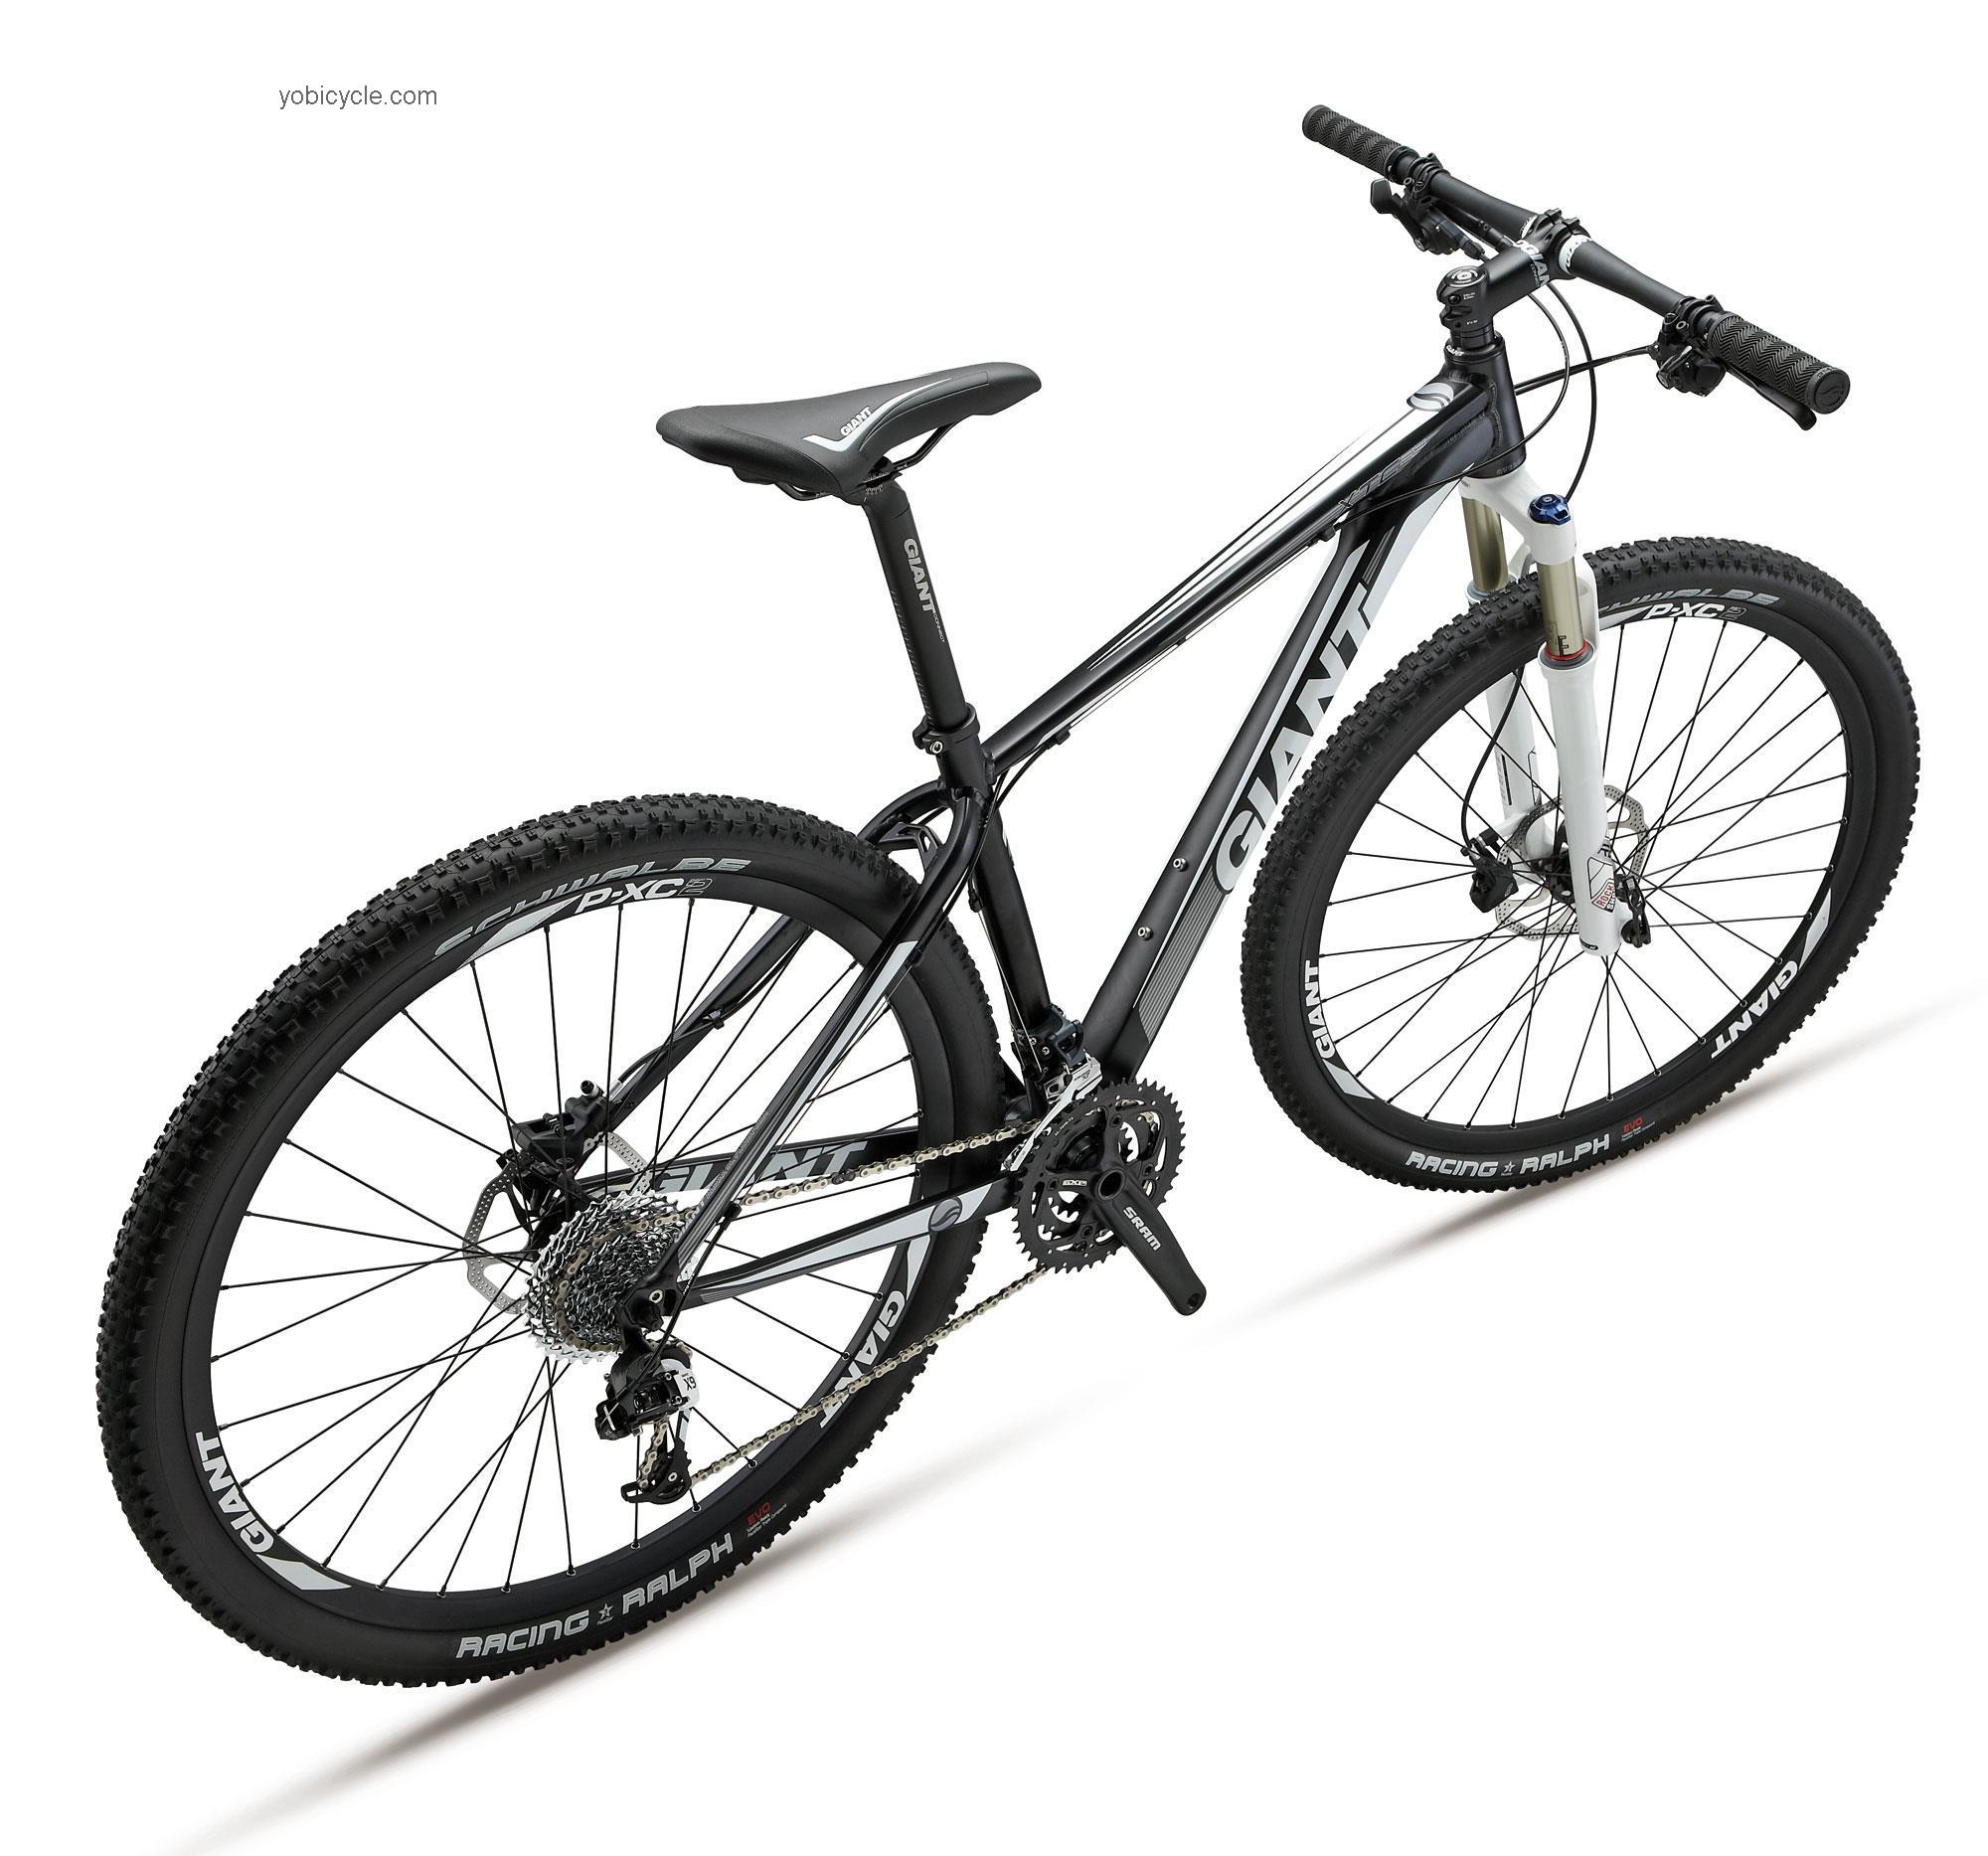 Giant  XTC 29er 1 Technical data and specifications